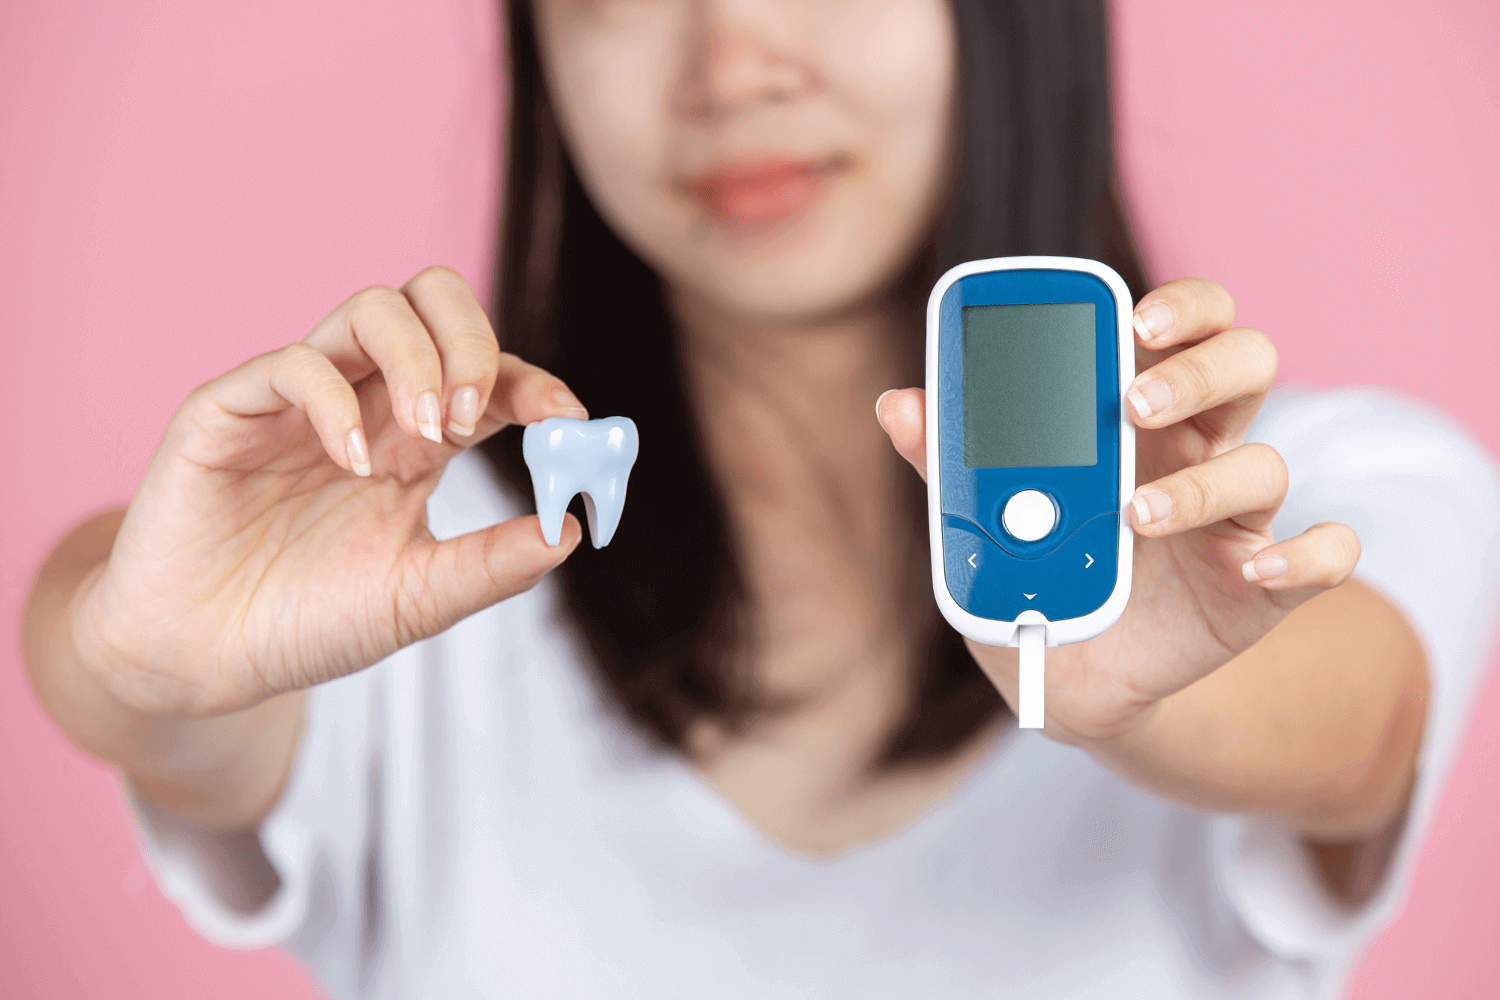 A photograph of a woman holding a tooth and a blood glucose meter.